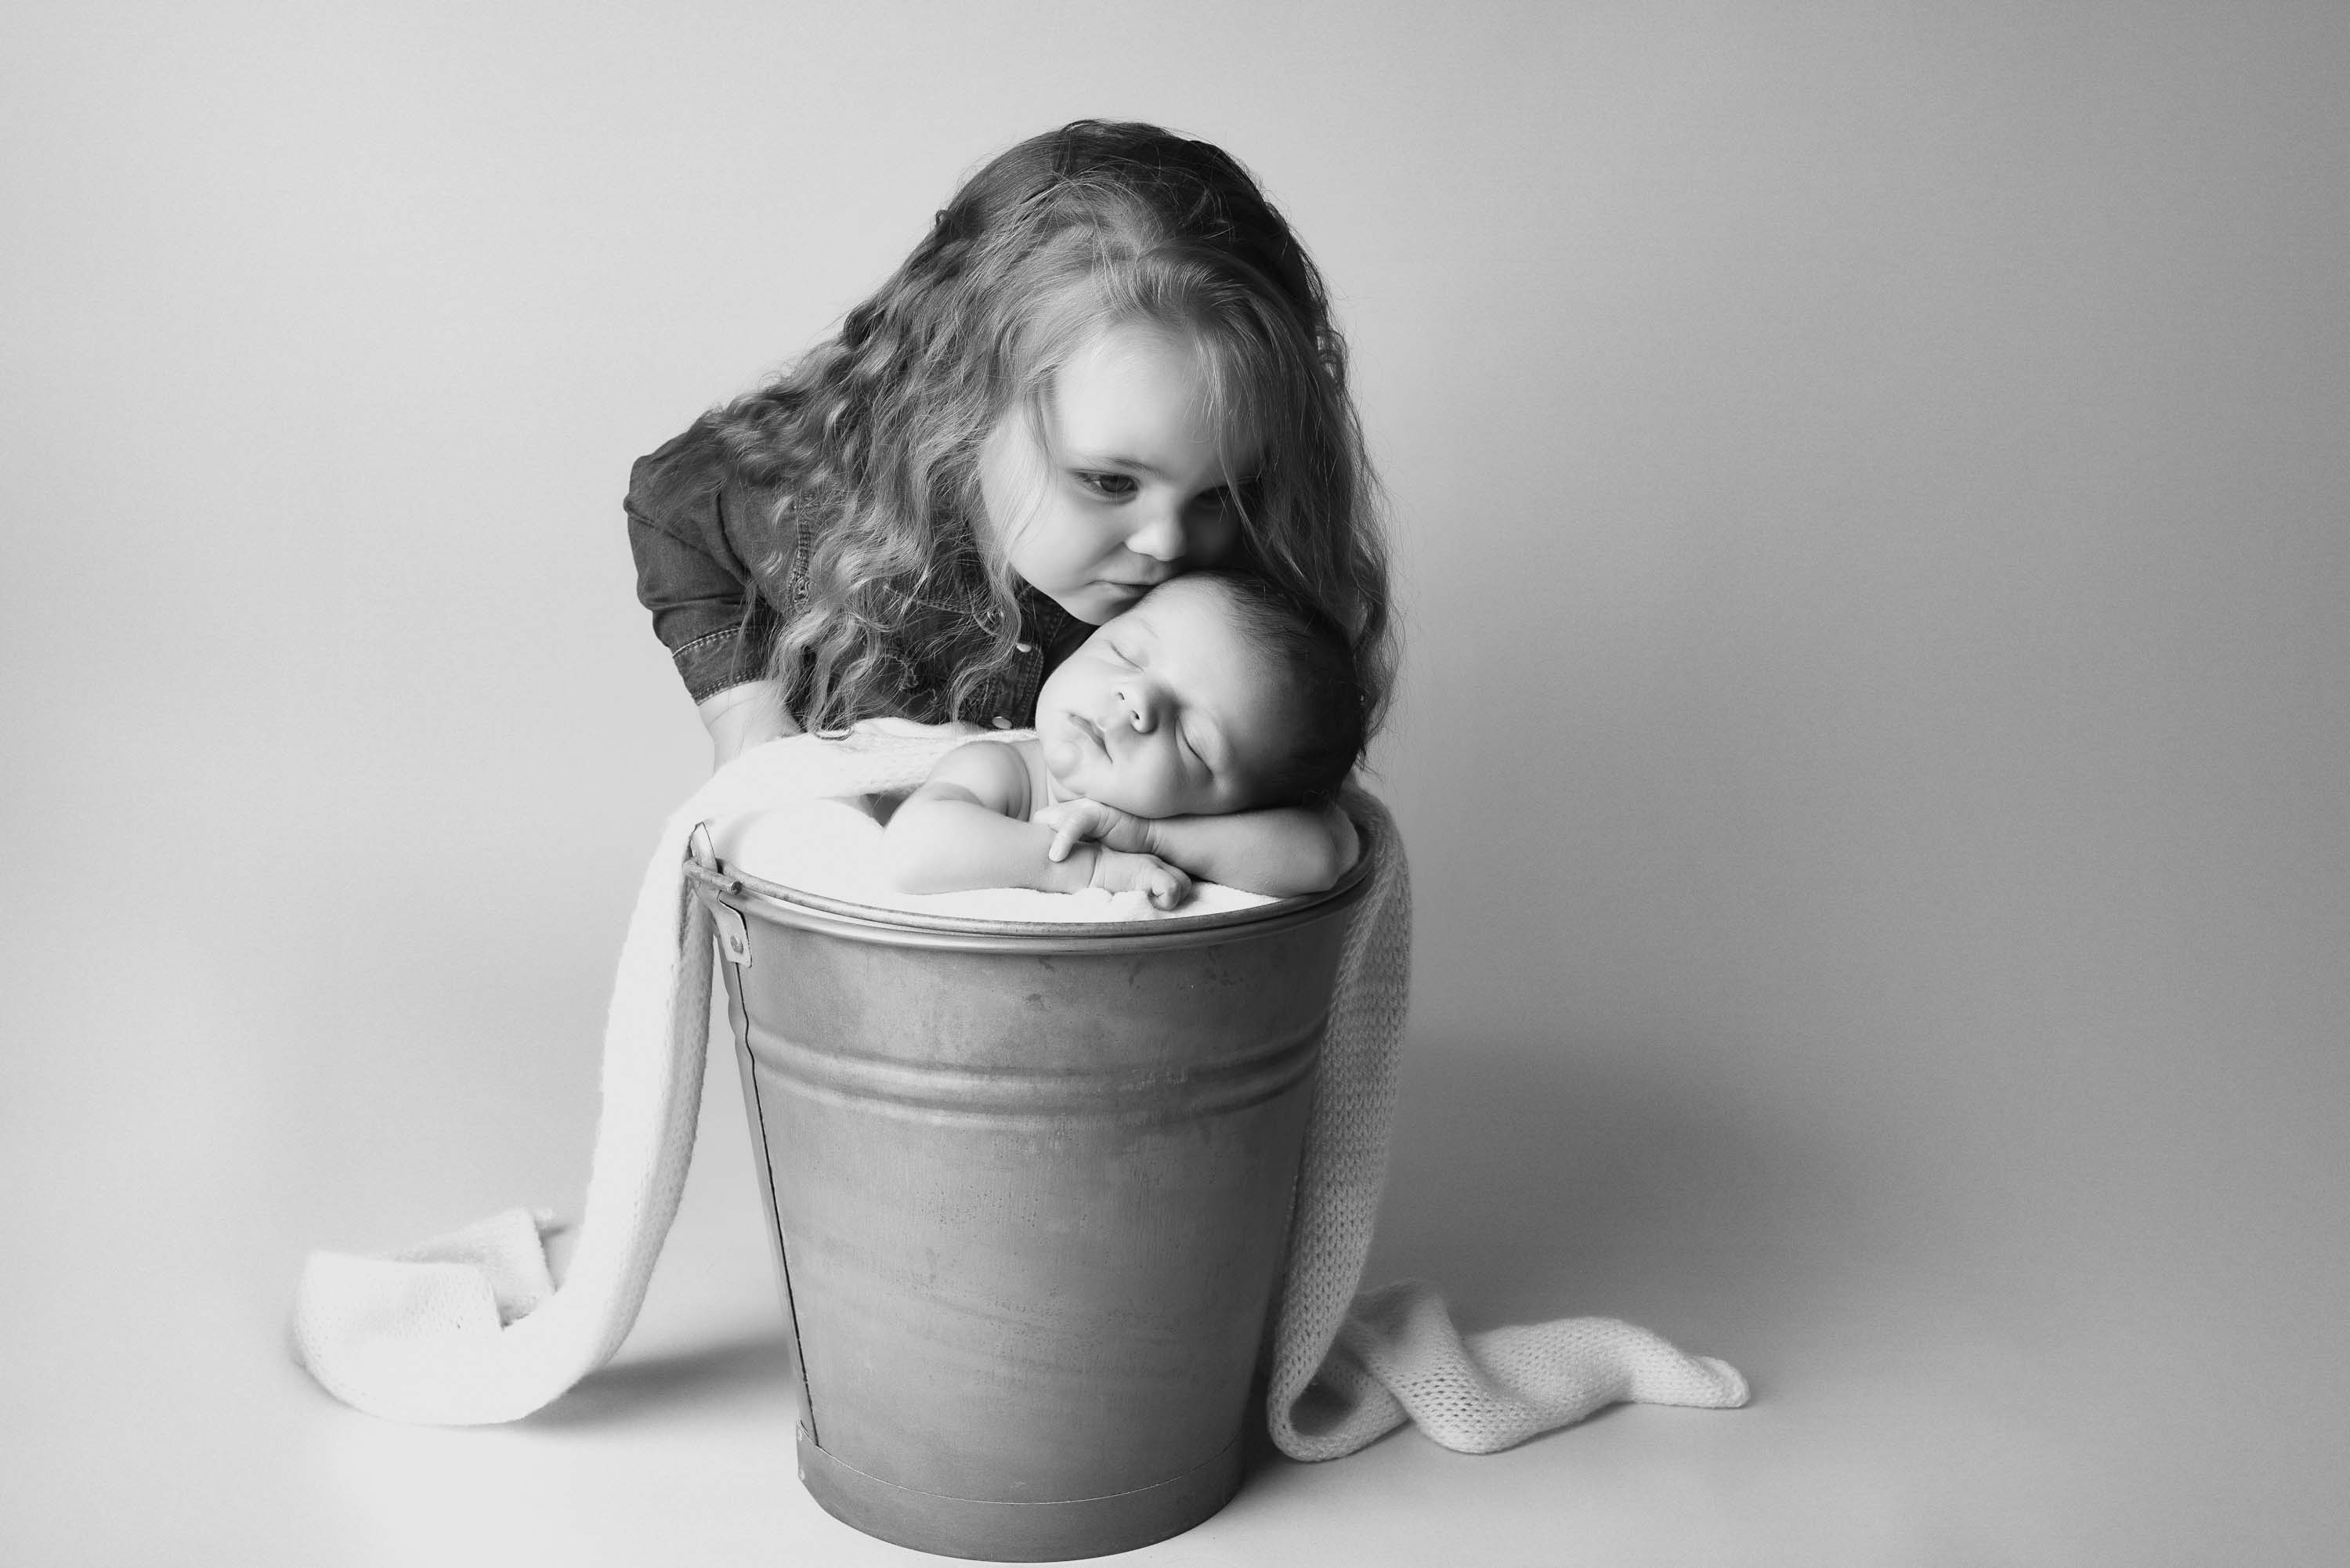 Two year old girl kissing her sibling on the forehead. Her brother is sleeping in a bucket.